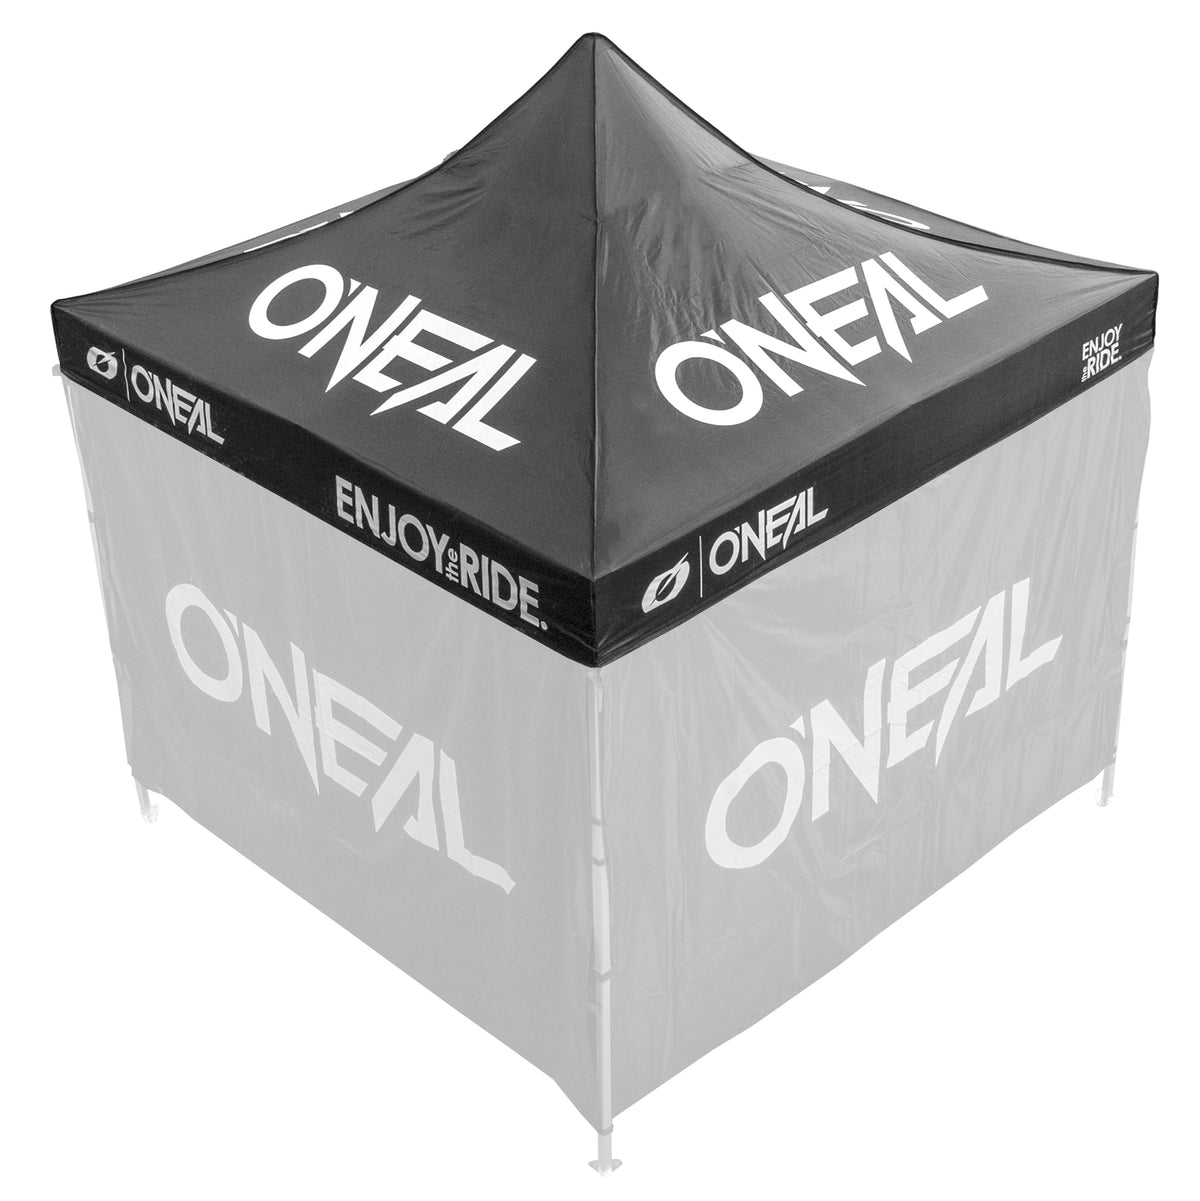 O'NEAL Canopy Tent